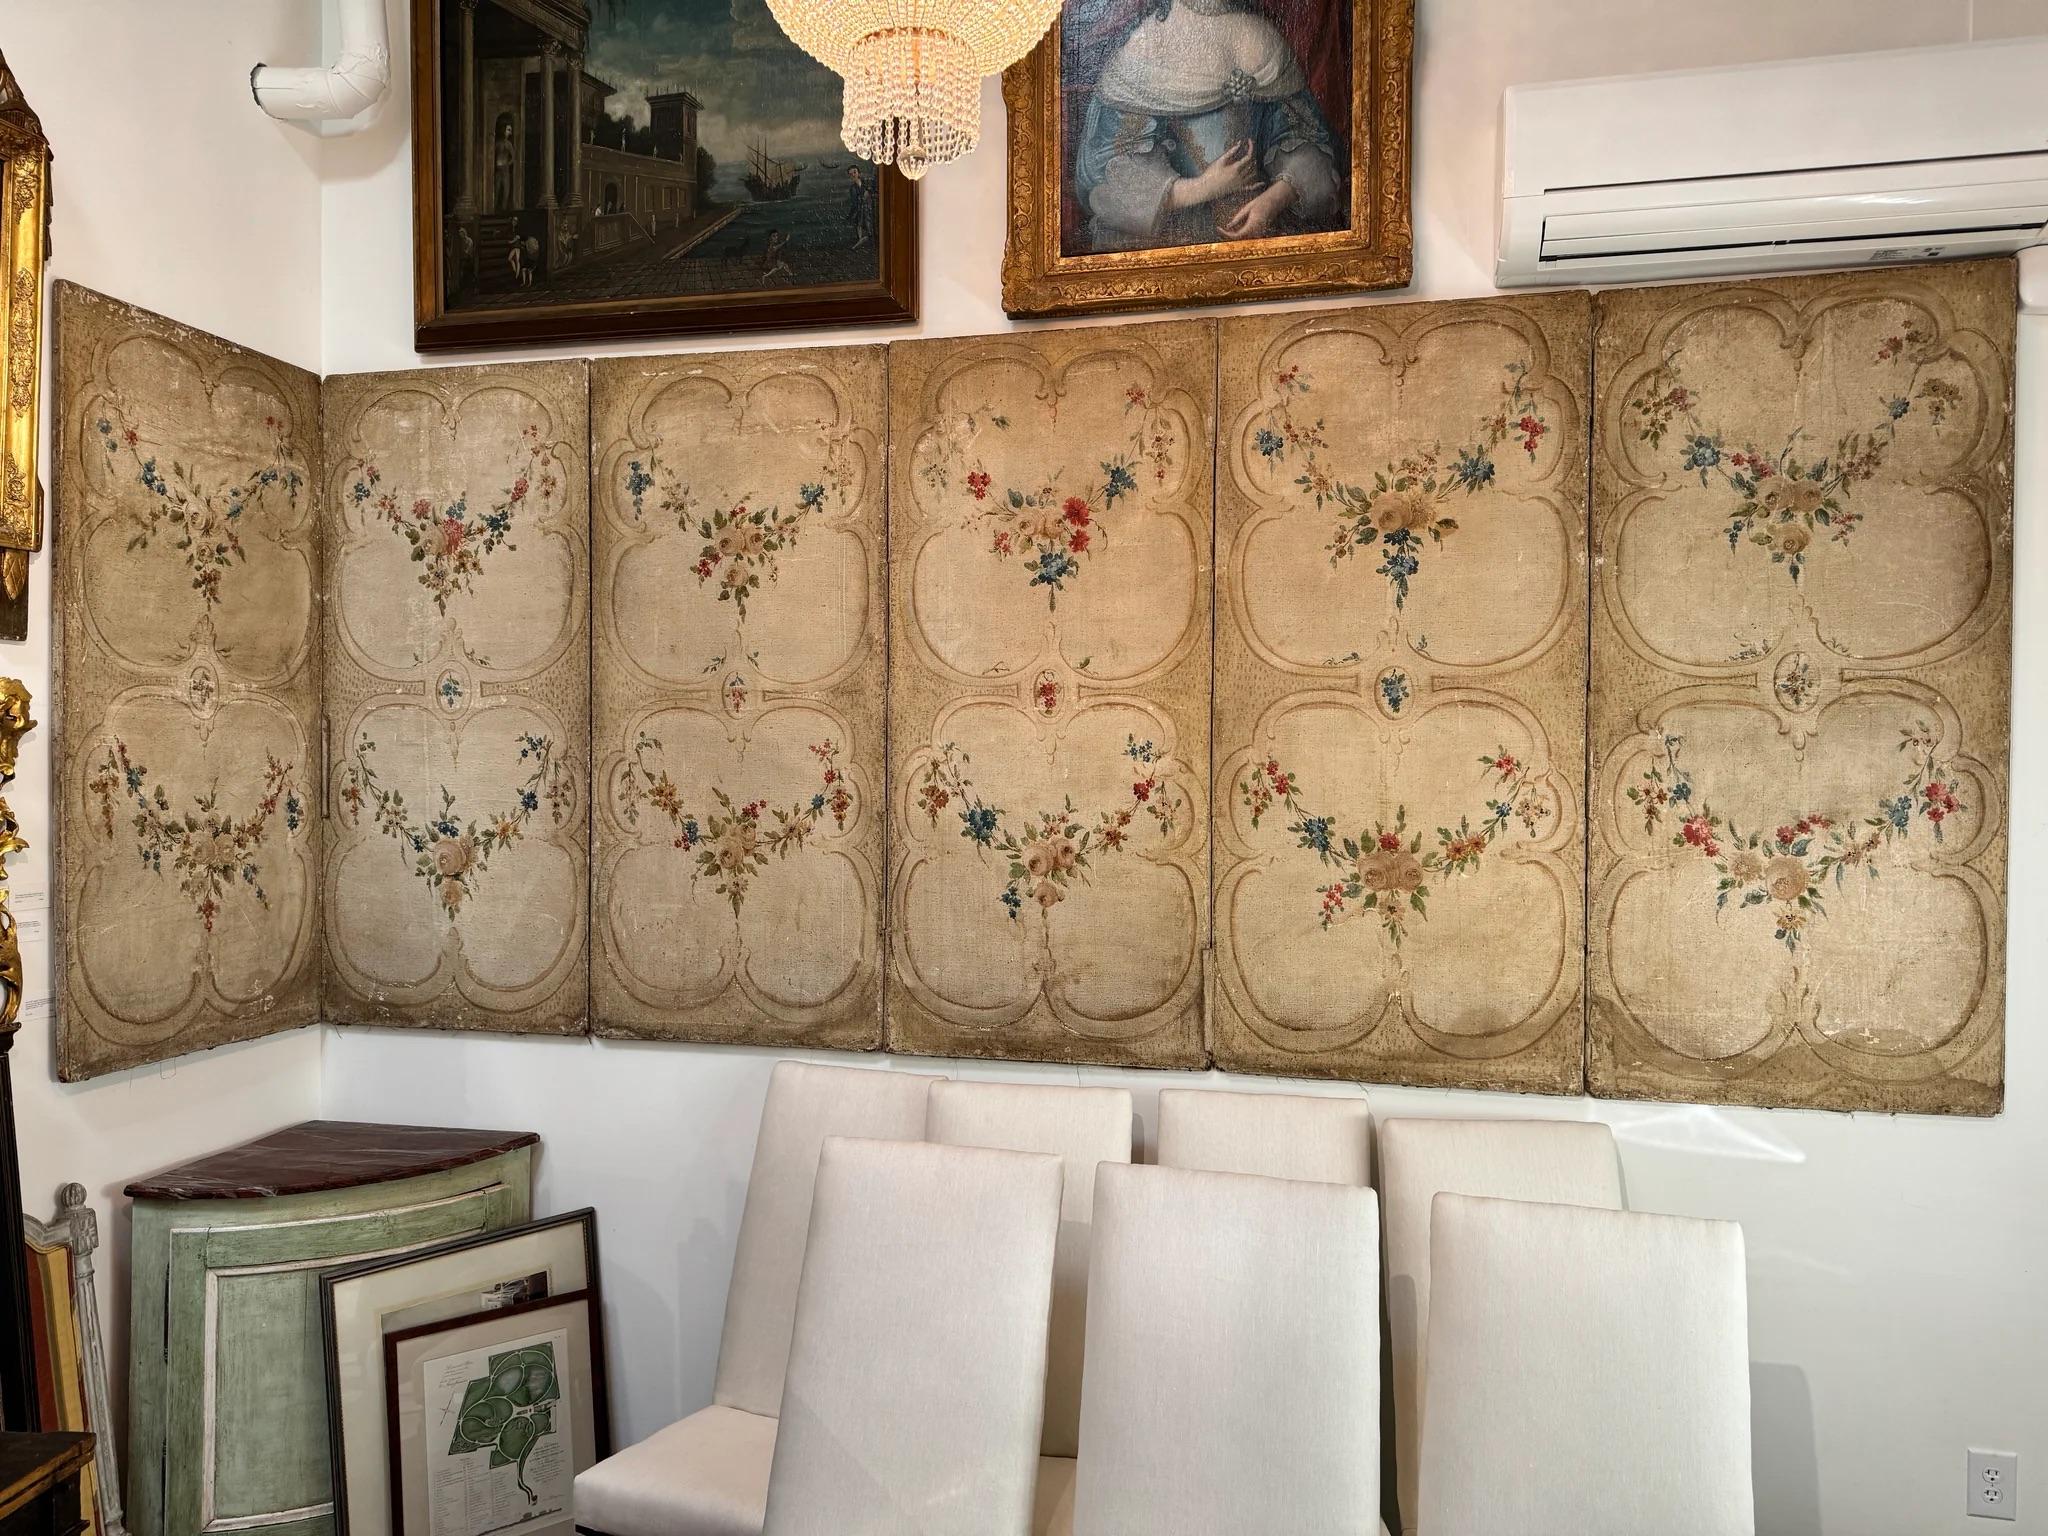 Found in a chateau in Lyon this period 18th Century, all original 6-panel paravent or floor screen - untouched.  The panels featuring draping floral garlands.  Each panel measures 62